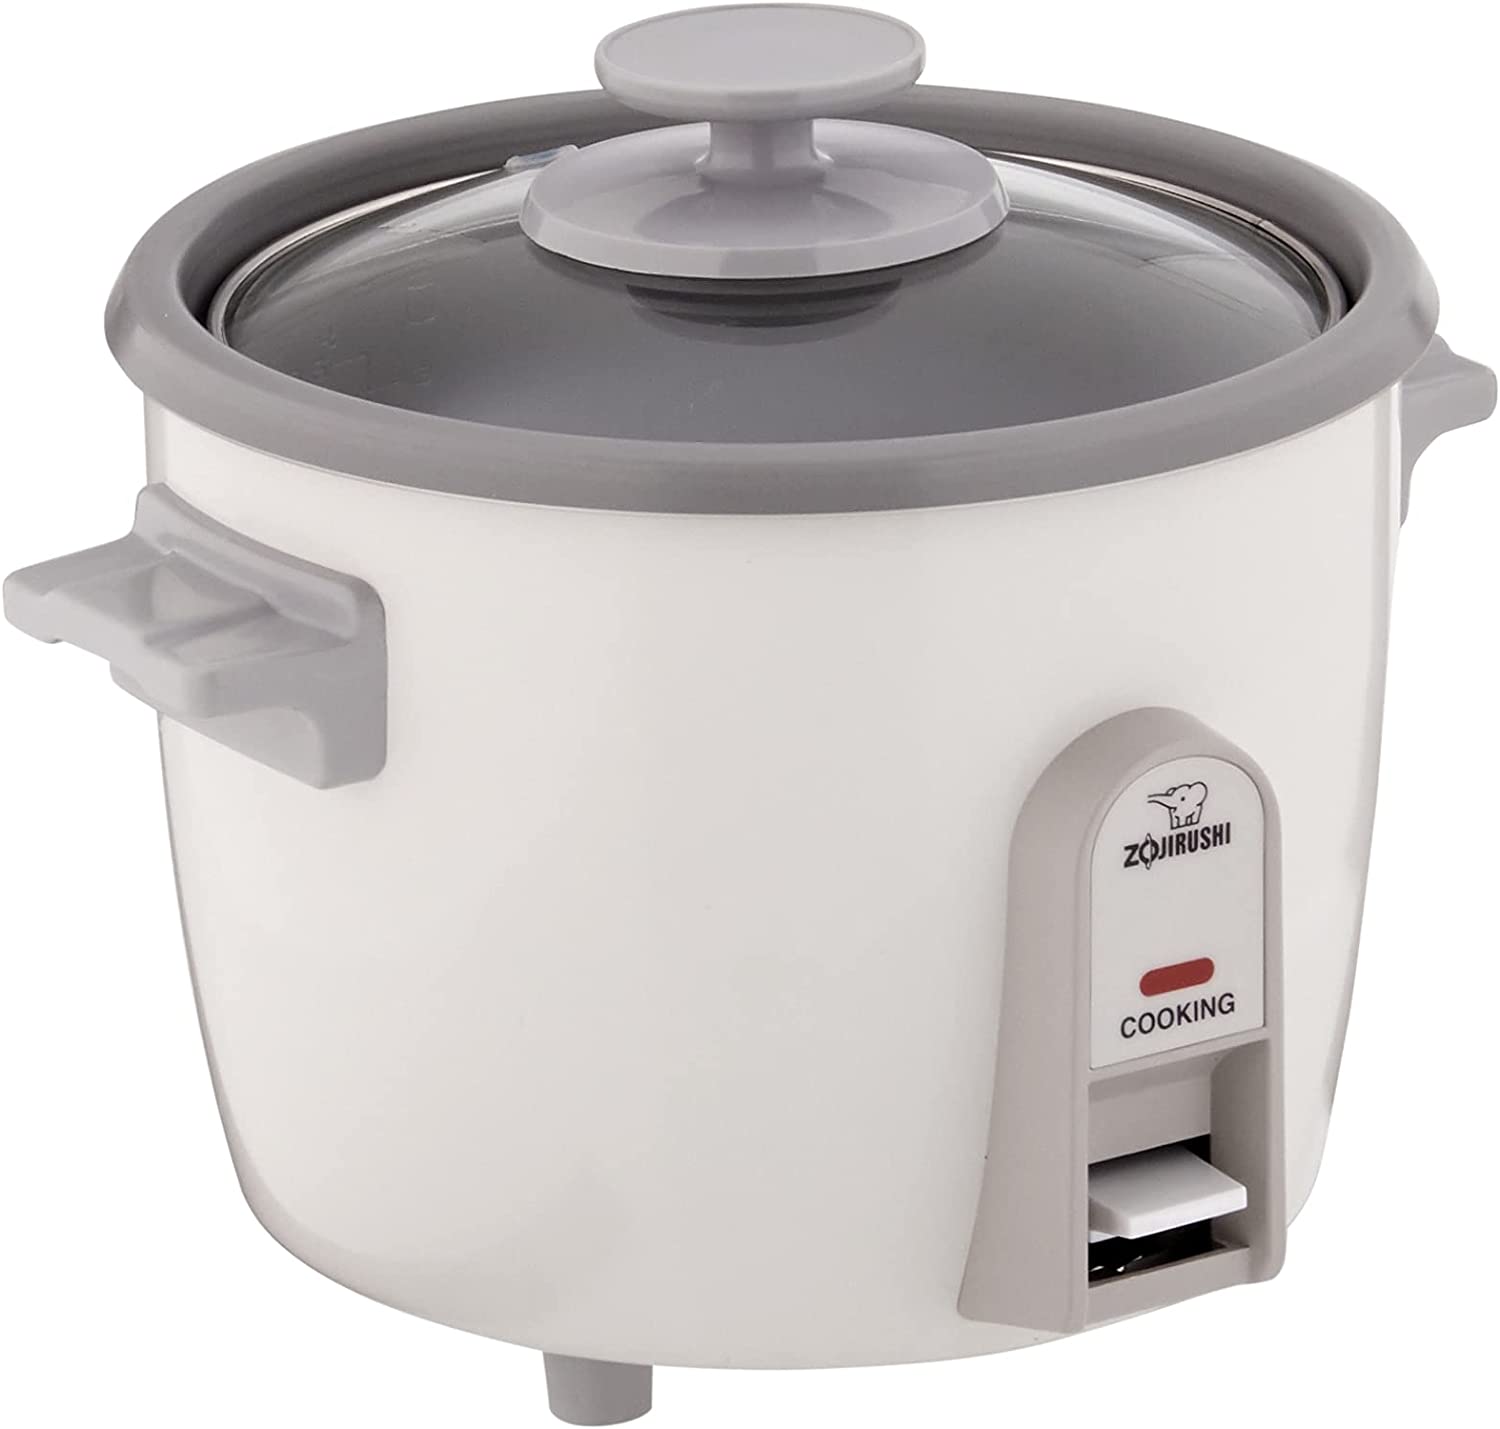 Zojirushi NHS-06 Handled Portable Rice Cooker, 3-Cup